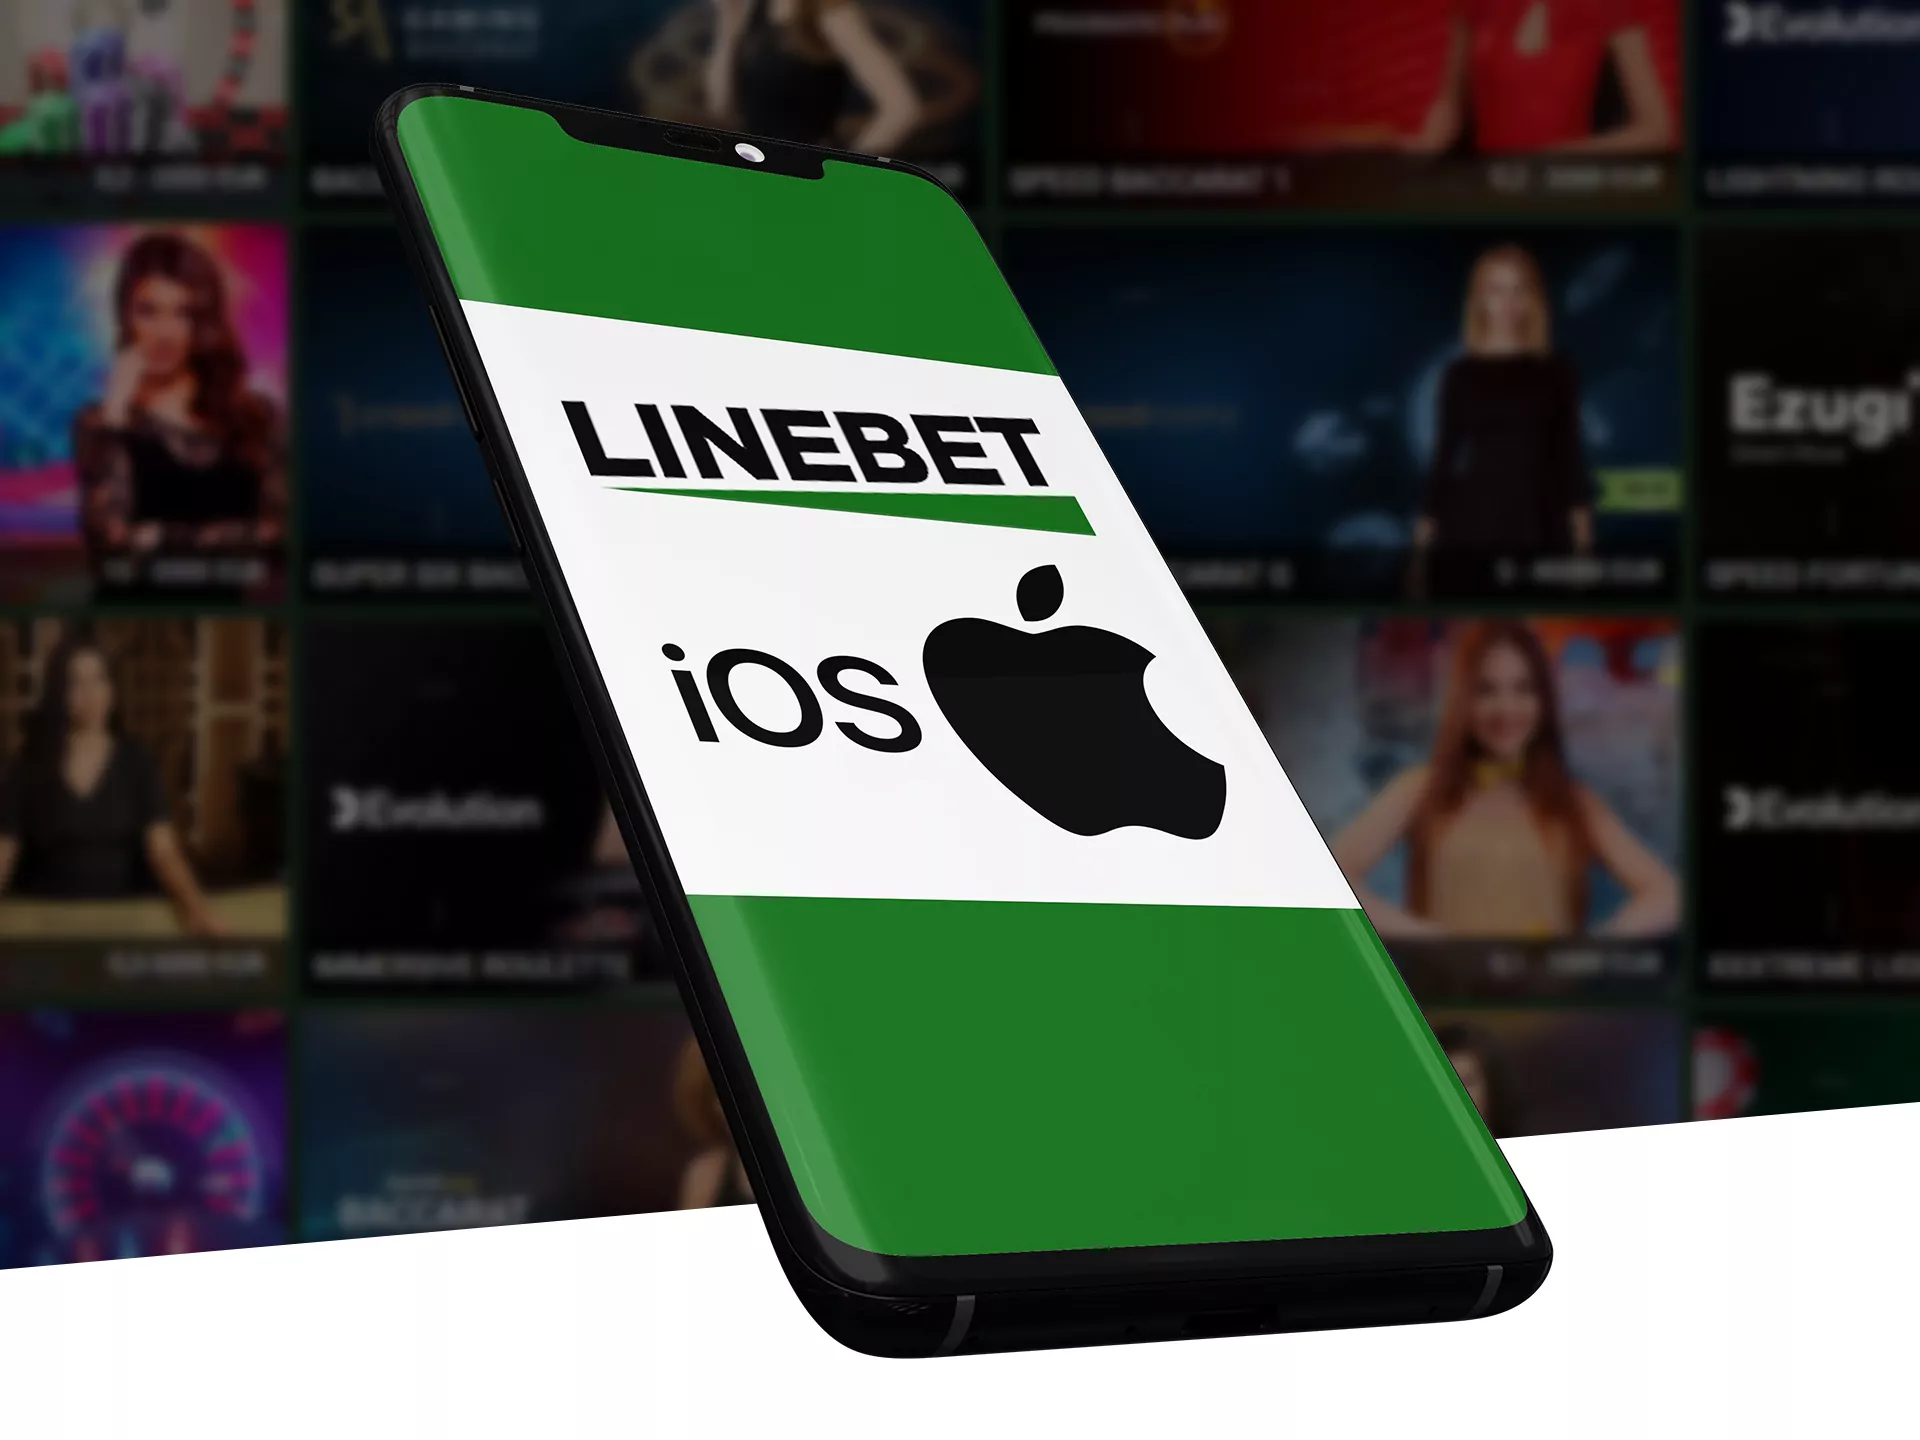 Check app store to download the Linebet app.